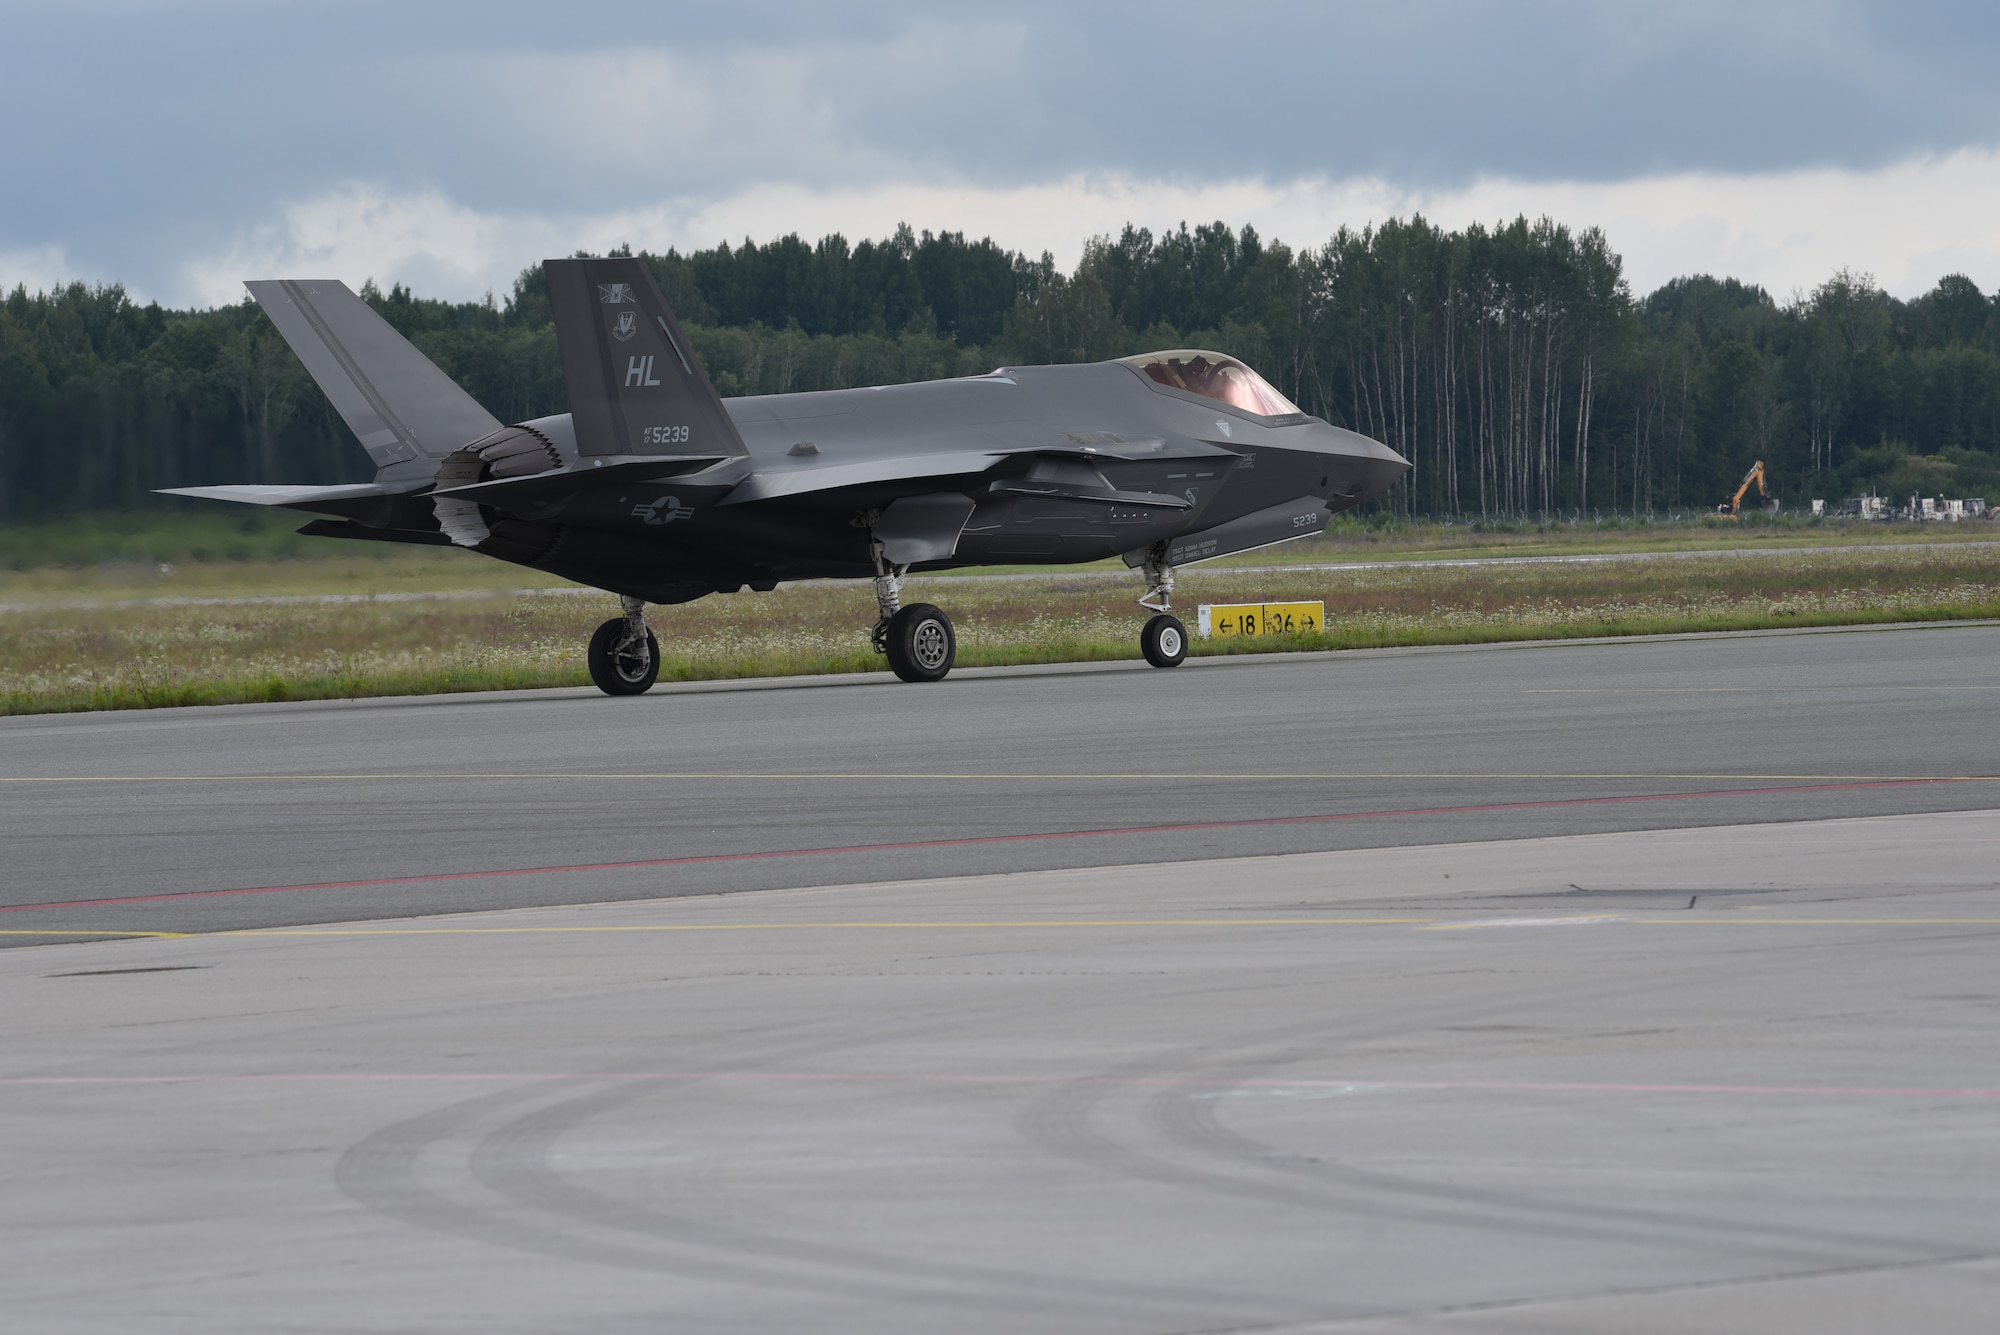 A U.S. Air Force F-35A Lightning II fighter jet deployed from the 388th and 419th Fighter Wings, Hill Air Force Base, Utah, taxis on a runway during Operation Rapid Forge at Lielvarde Air Base, Latvia, July, 23, 2019. This is the first time a U.S. Air Force F-35 Lightning II stealth fighter has landed in Latvia. Operation Rapid Forge is a U.S. Air Forces in Europe-led mission to enhance readiness and test the ability to function at locations other than the main air bases.